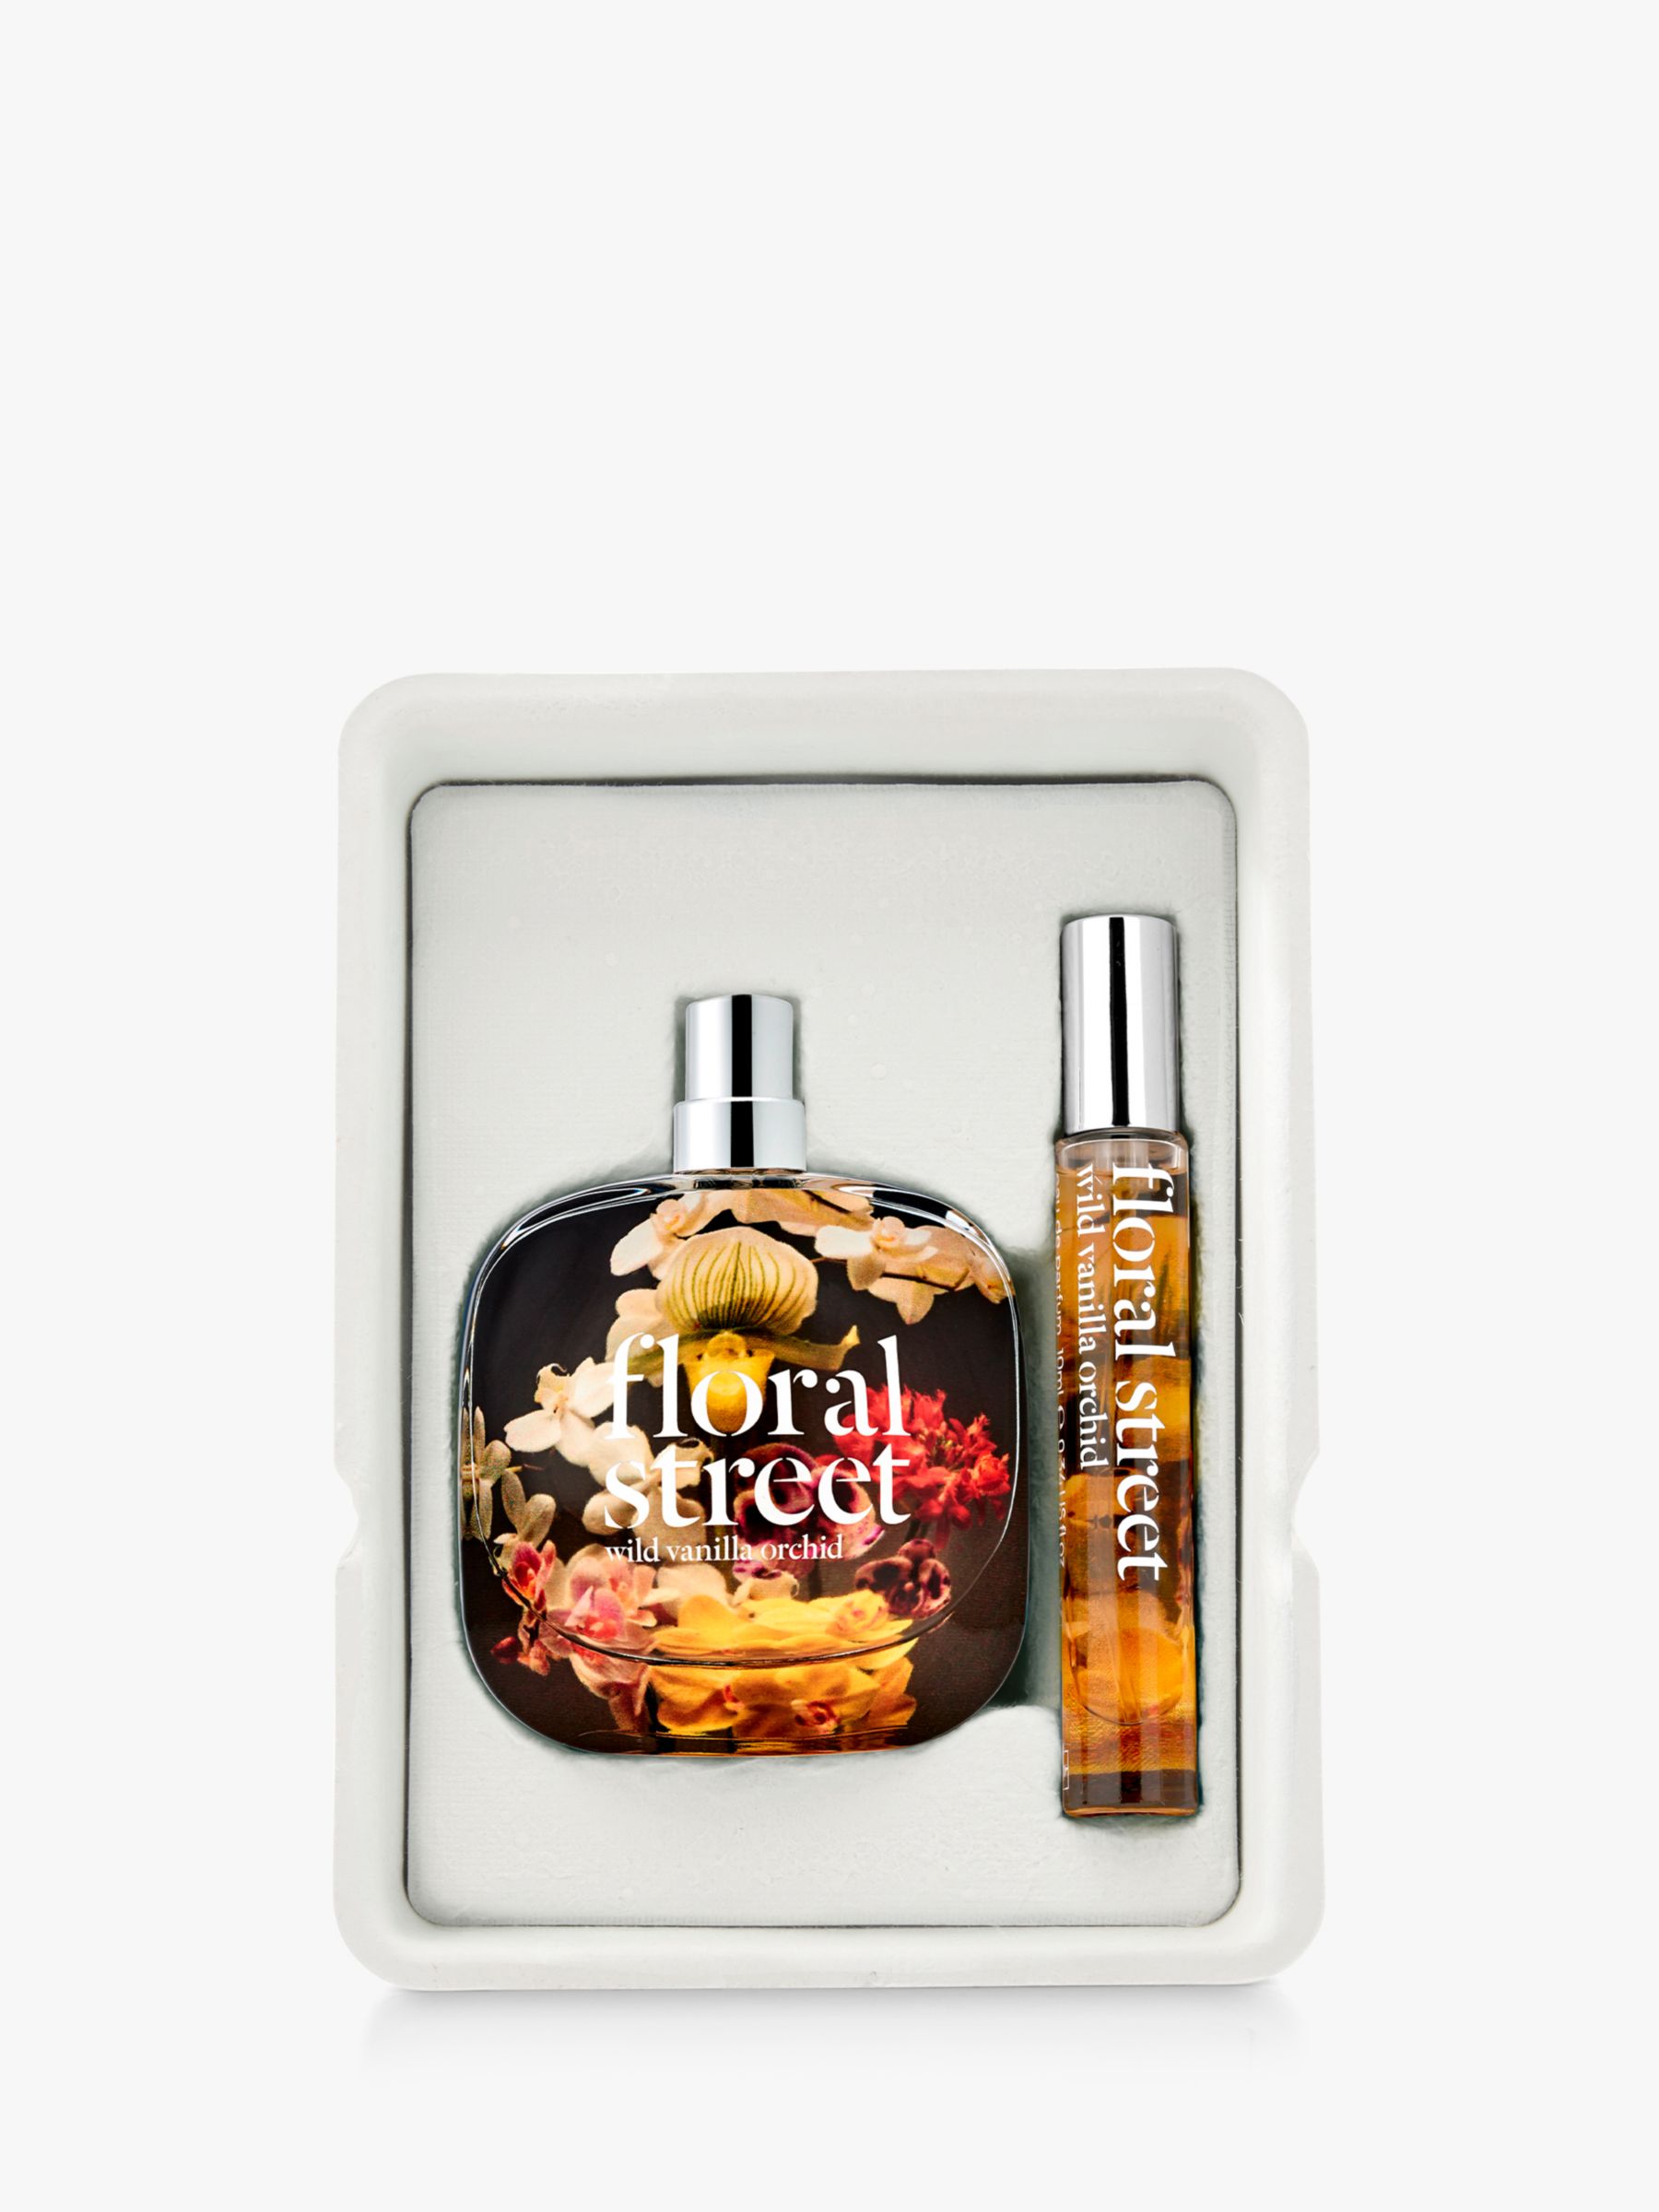 Floral Street Wild Vanilla Orchid Home & Away Fragrance Gift Set 3